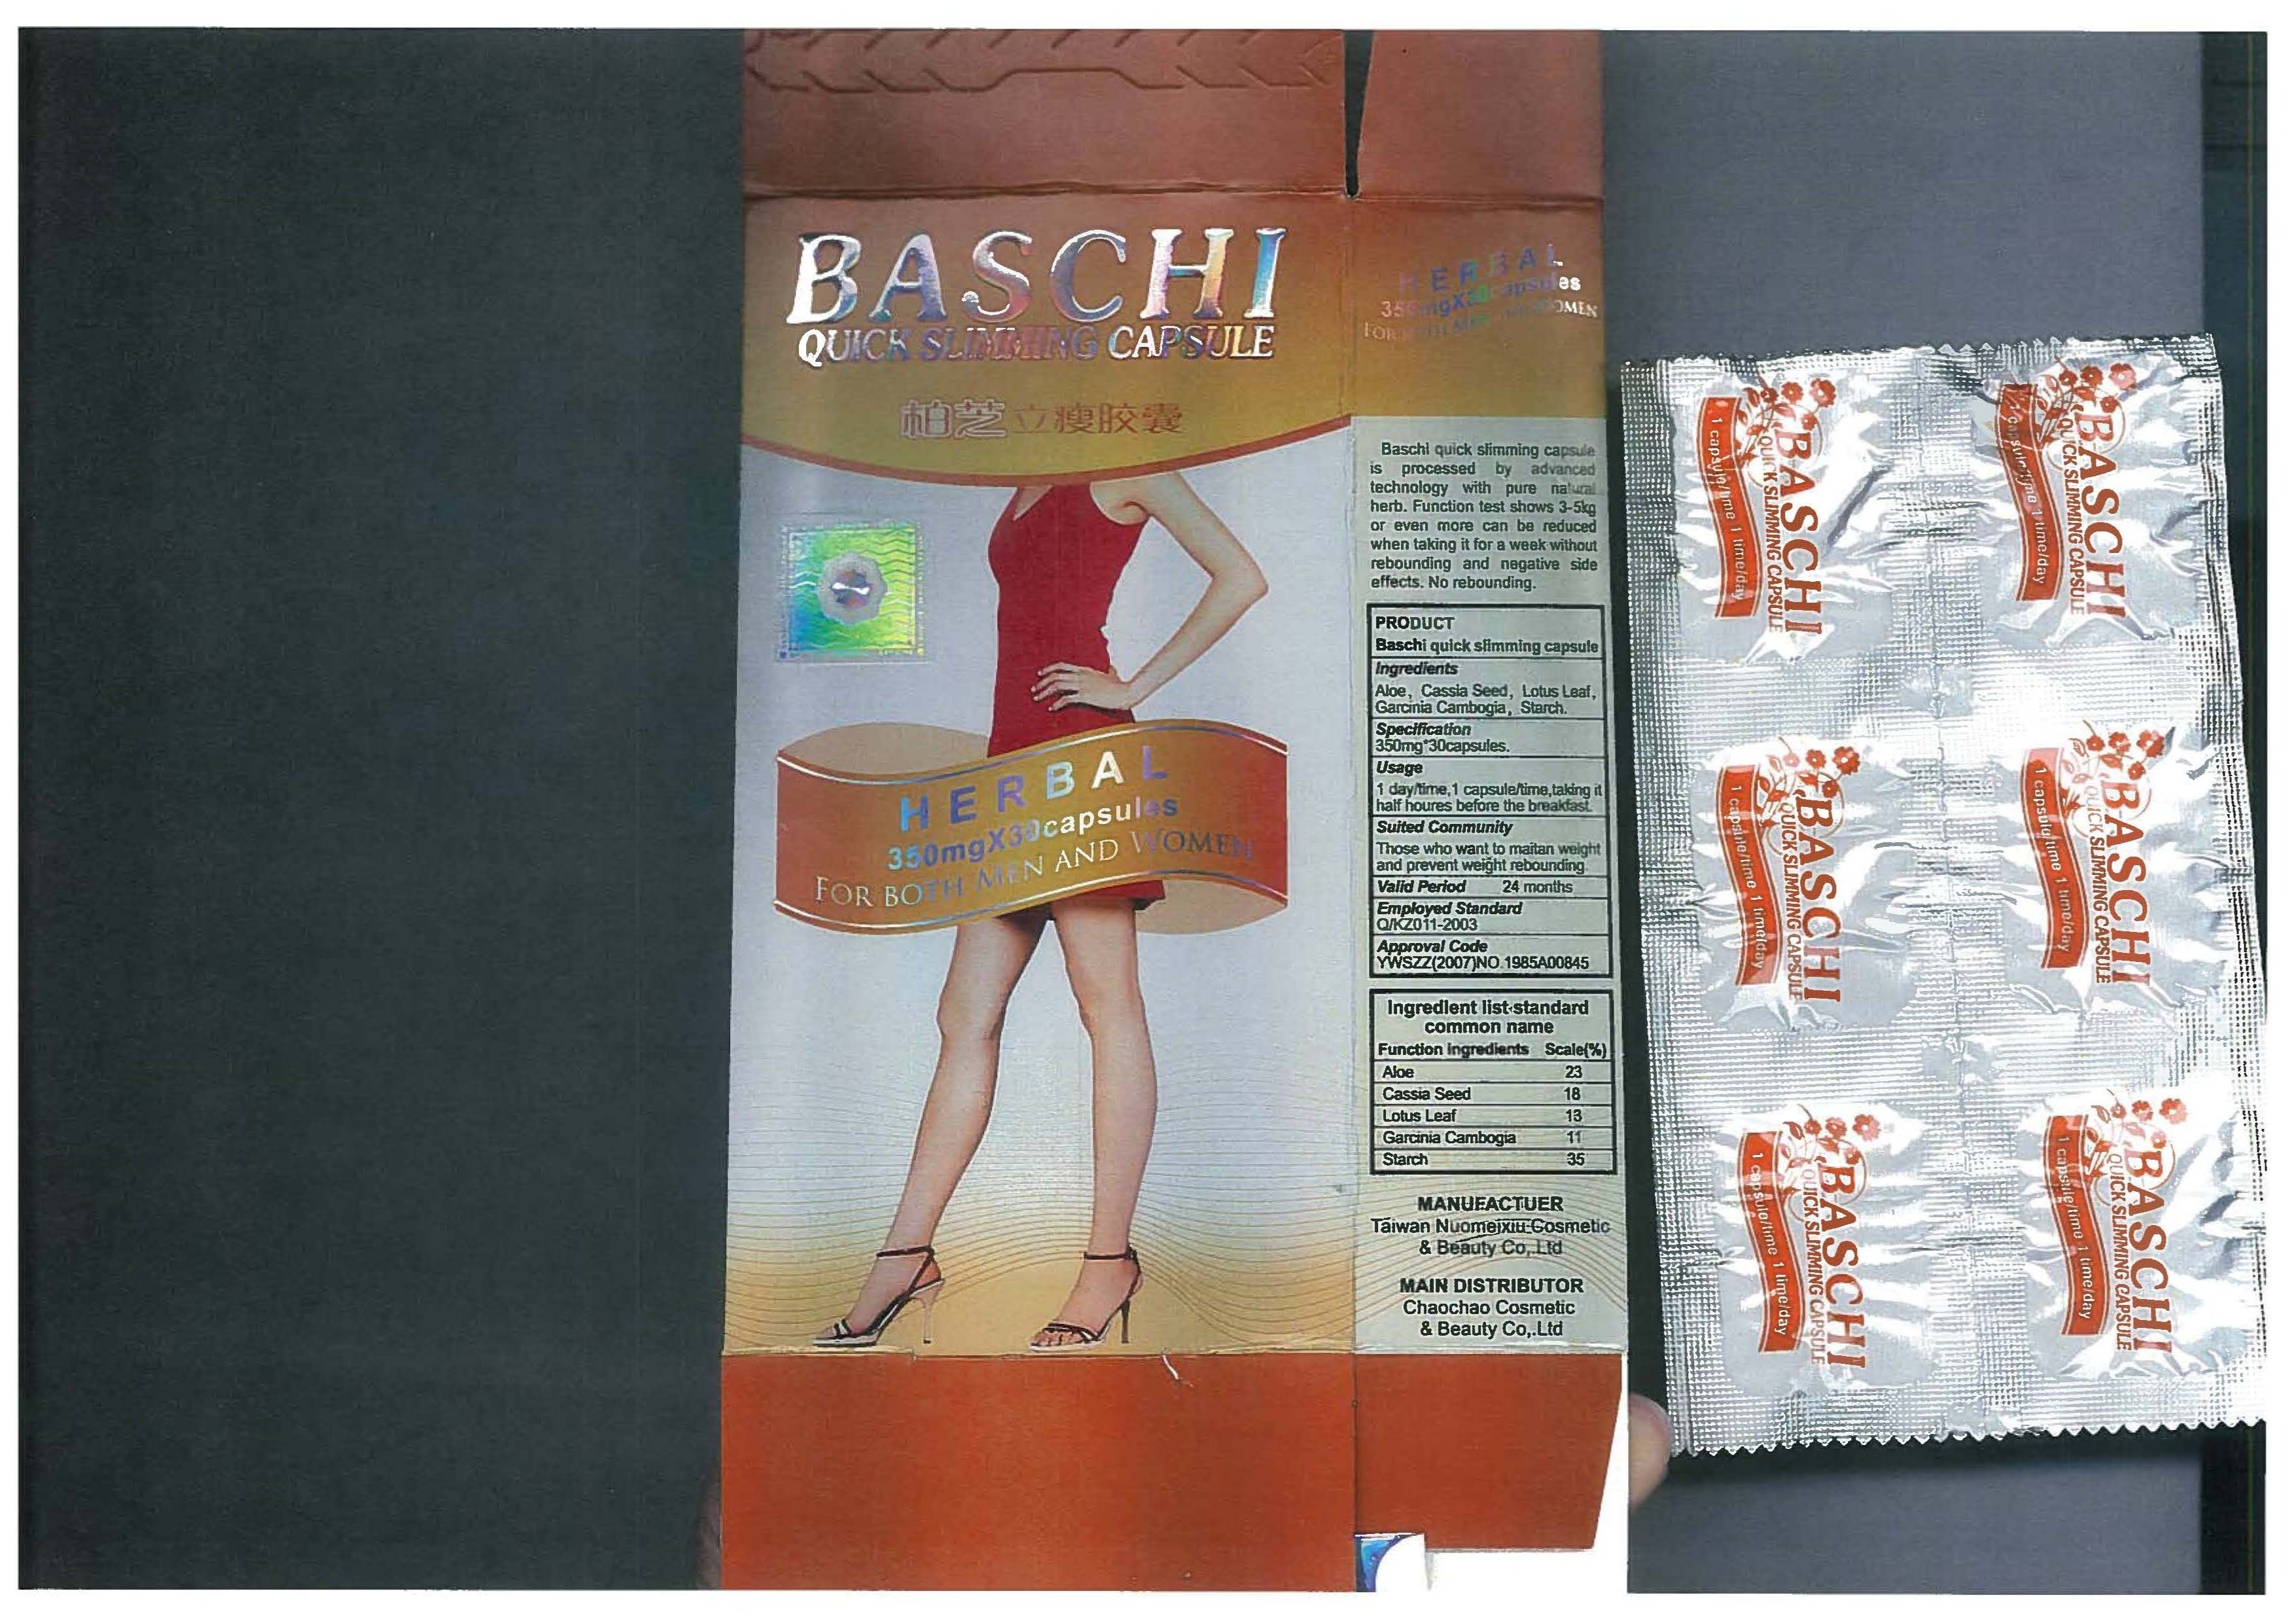 Image of the illigal product: Baschi Quick Slimming Capsules